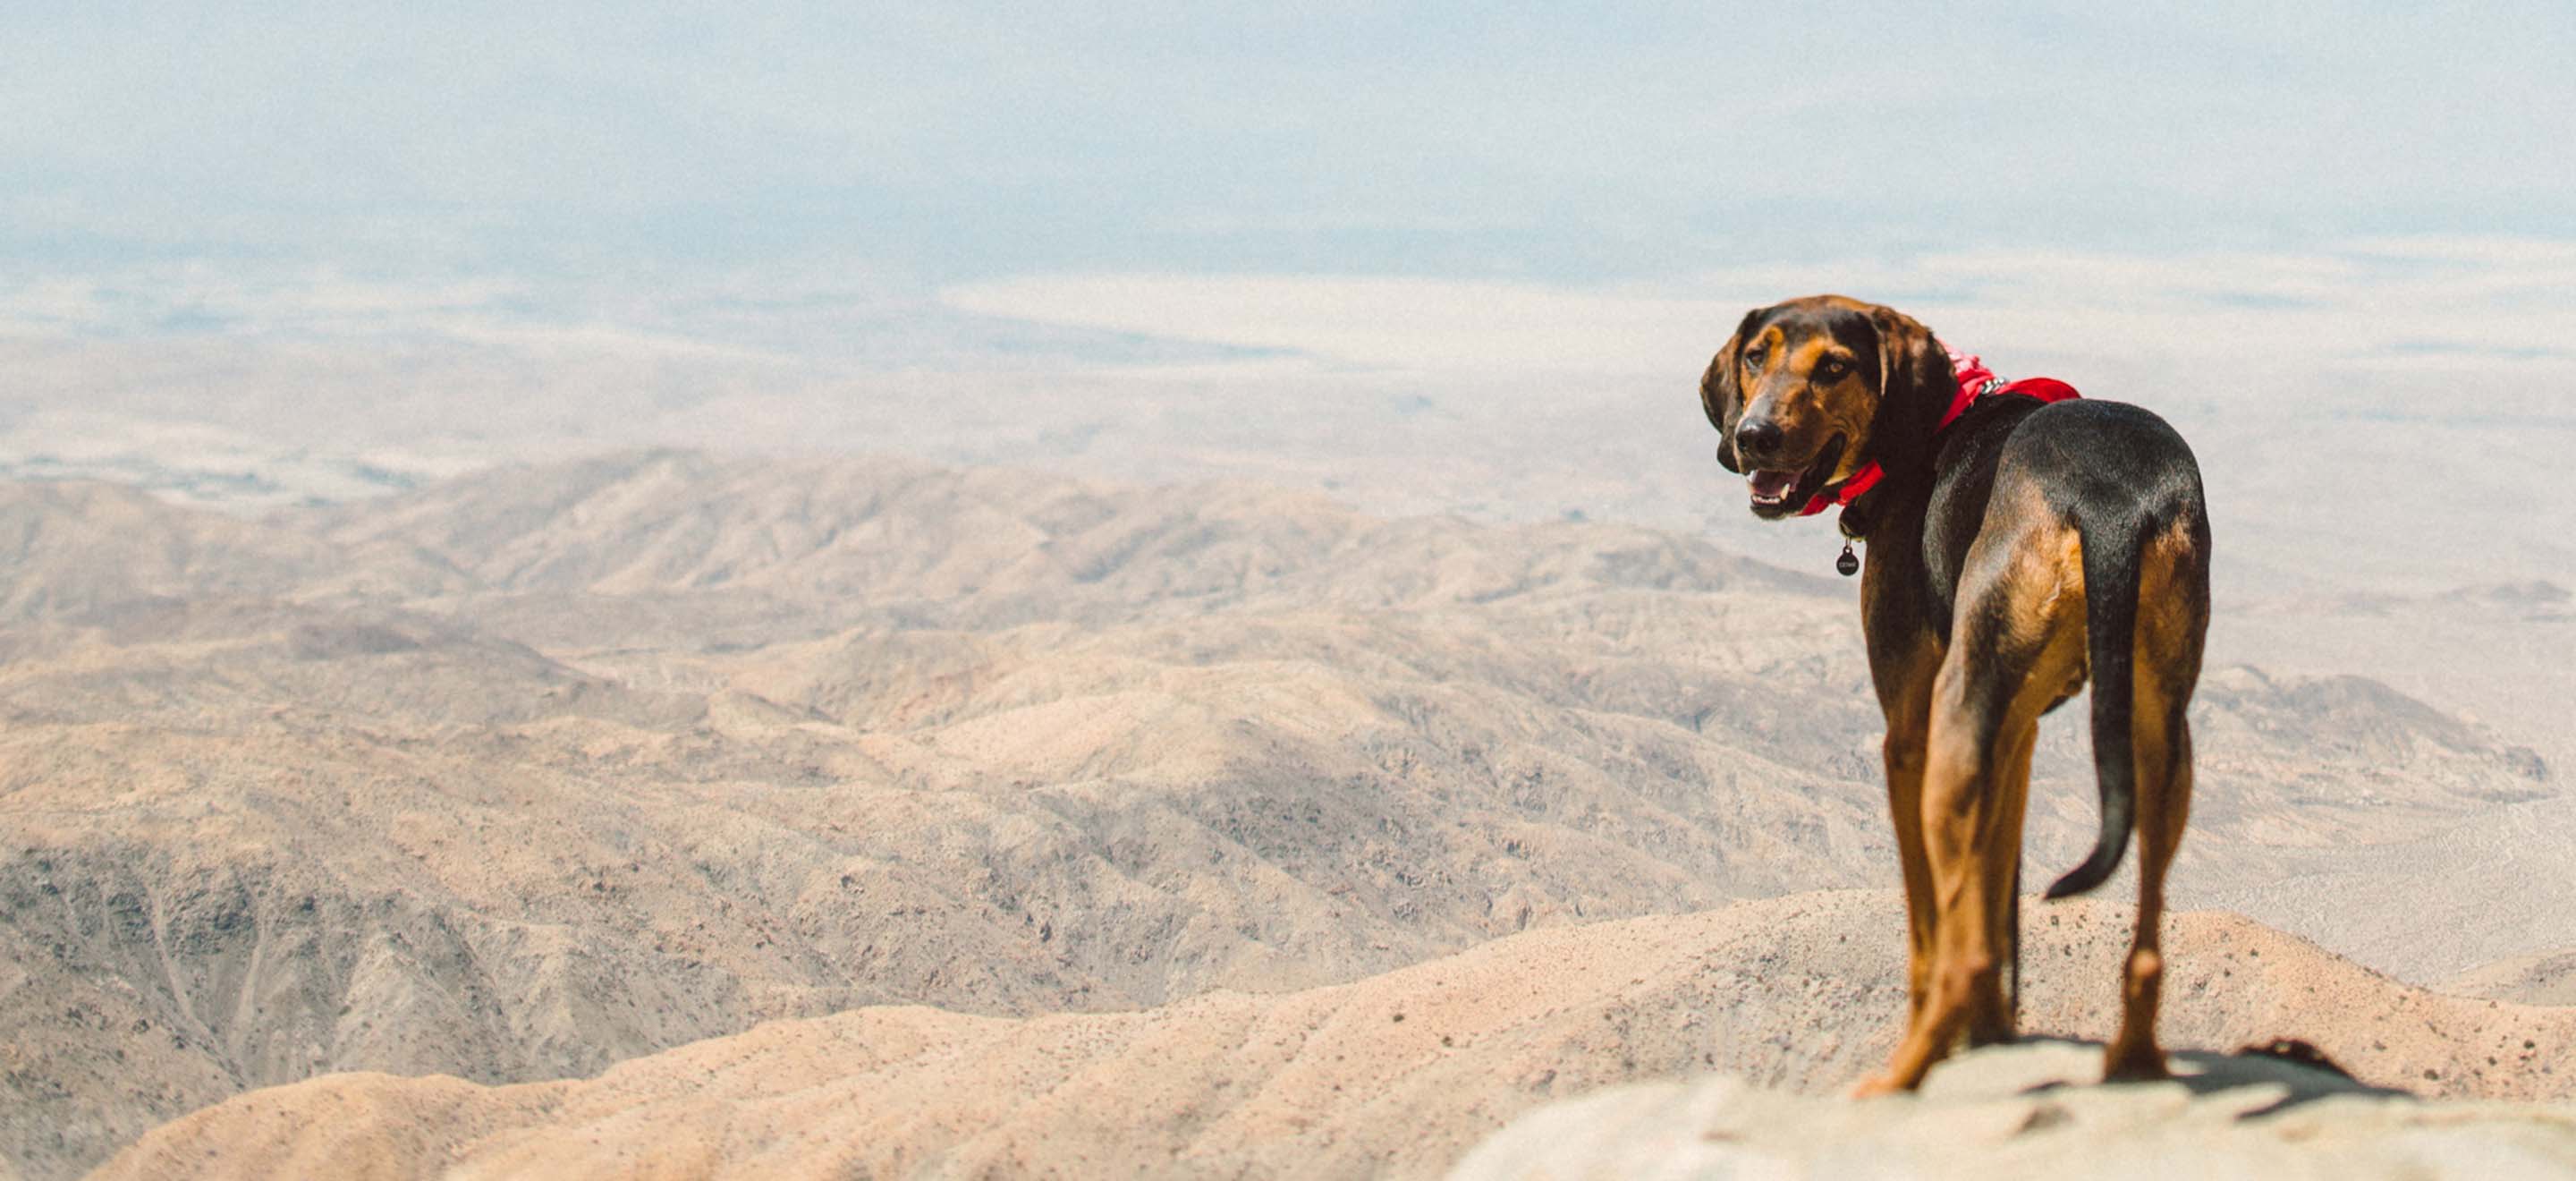 A Black And Tan Coonhound standing on a cliffside overlooking a desert mountain-ridge image